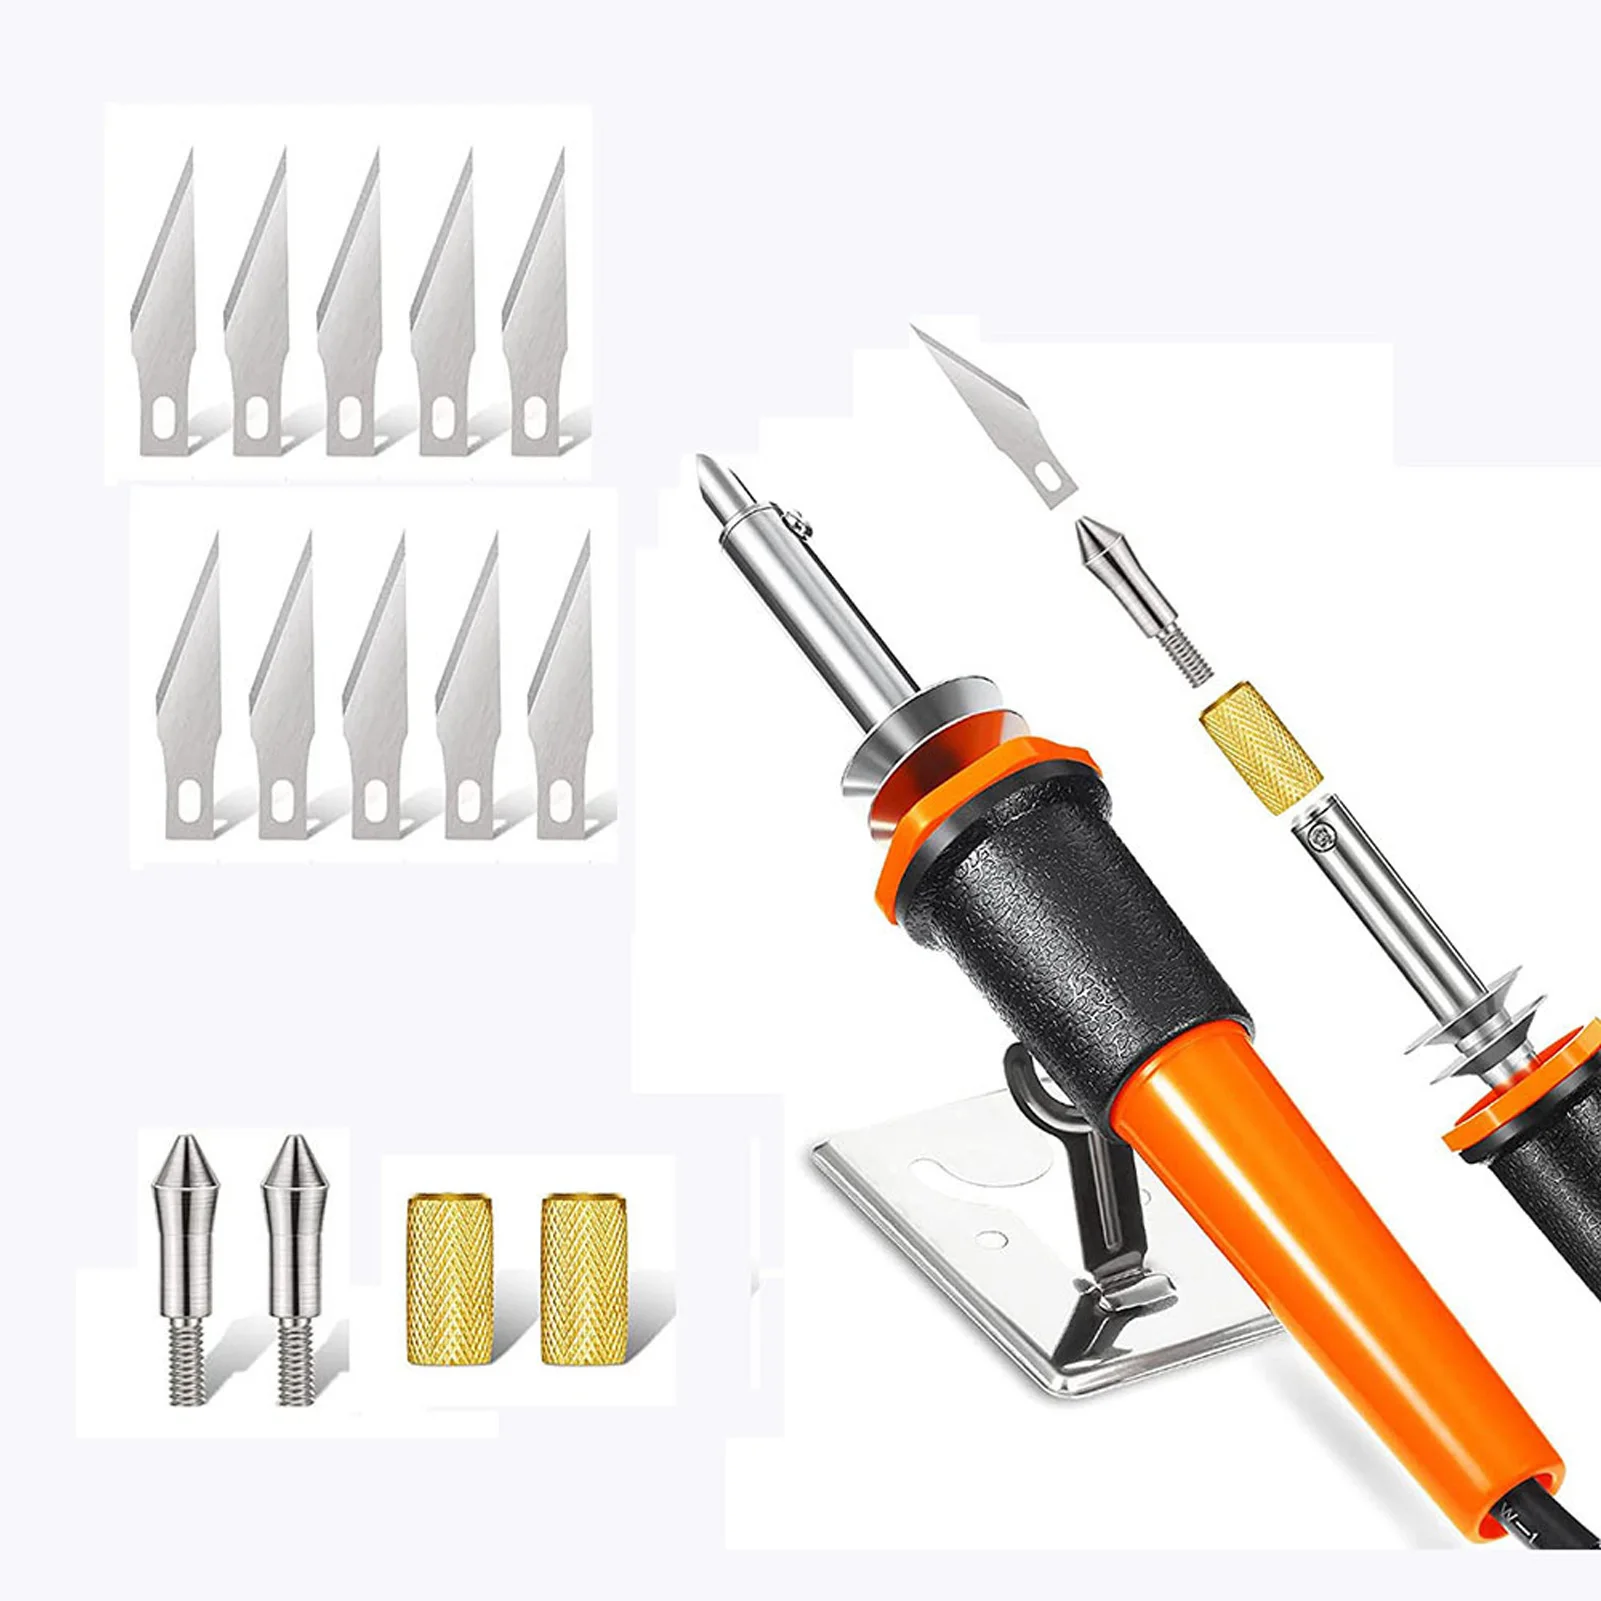 Soldering Iron Kit 60W Adjustable Temperature Soldering Iron DIY Engraving Tool Set with Tips US Plug 110‑120V